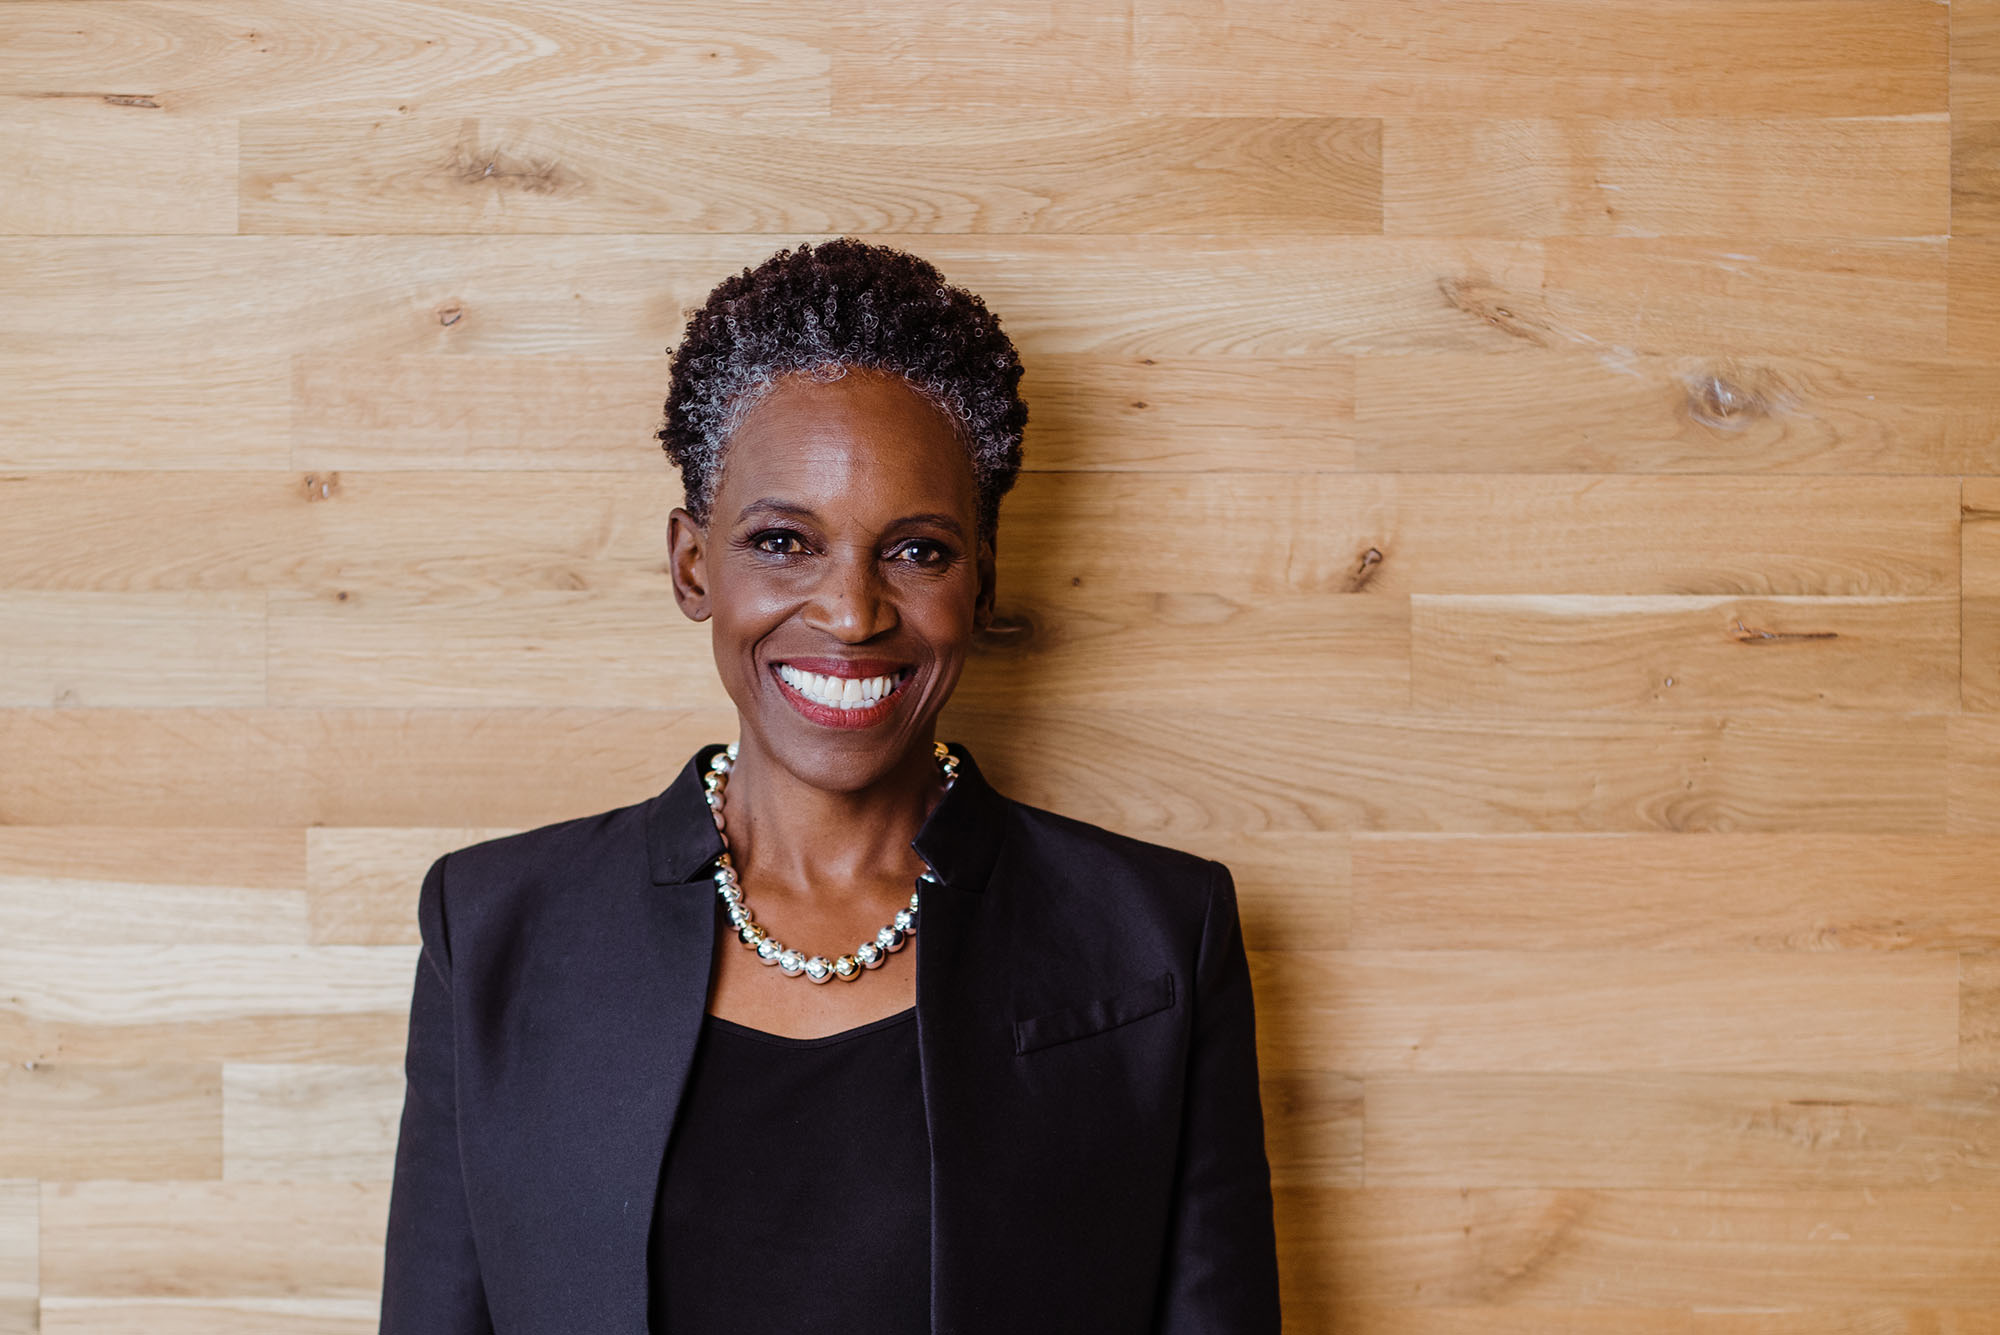 Photo: A Black woman with a short grey and black afro and wearing a necklace of large, faux metal pearls, black blouse, and black blazer, smiles and poses in front of a large, wooden wall.